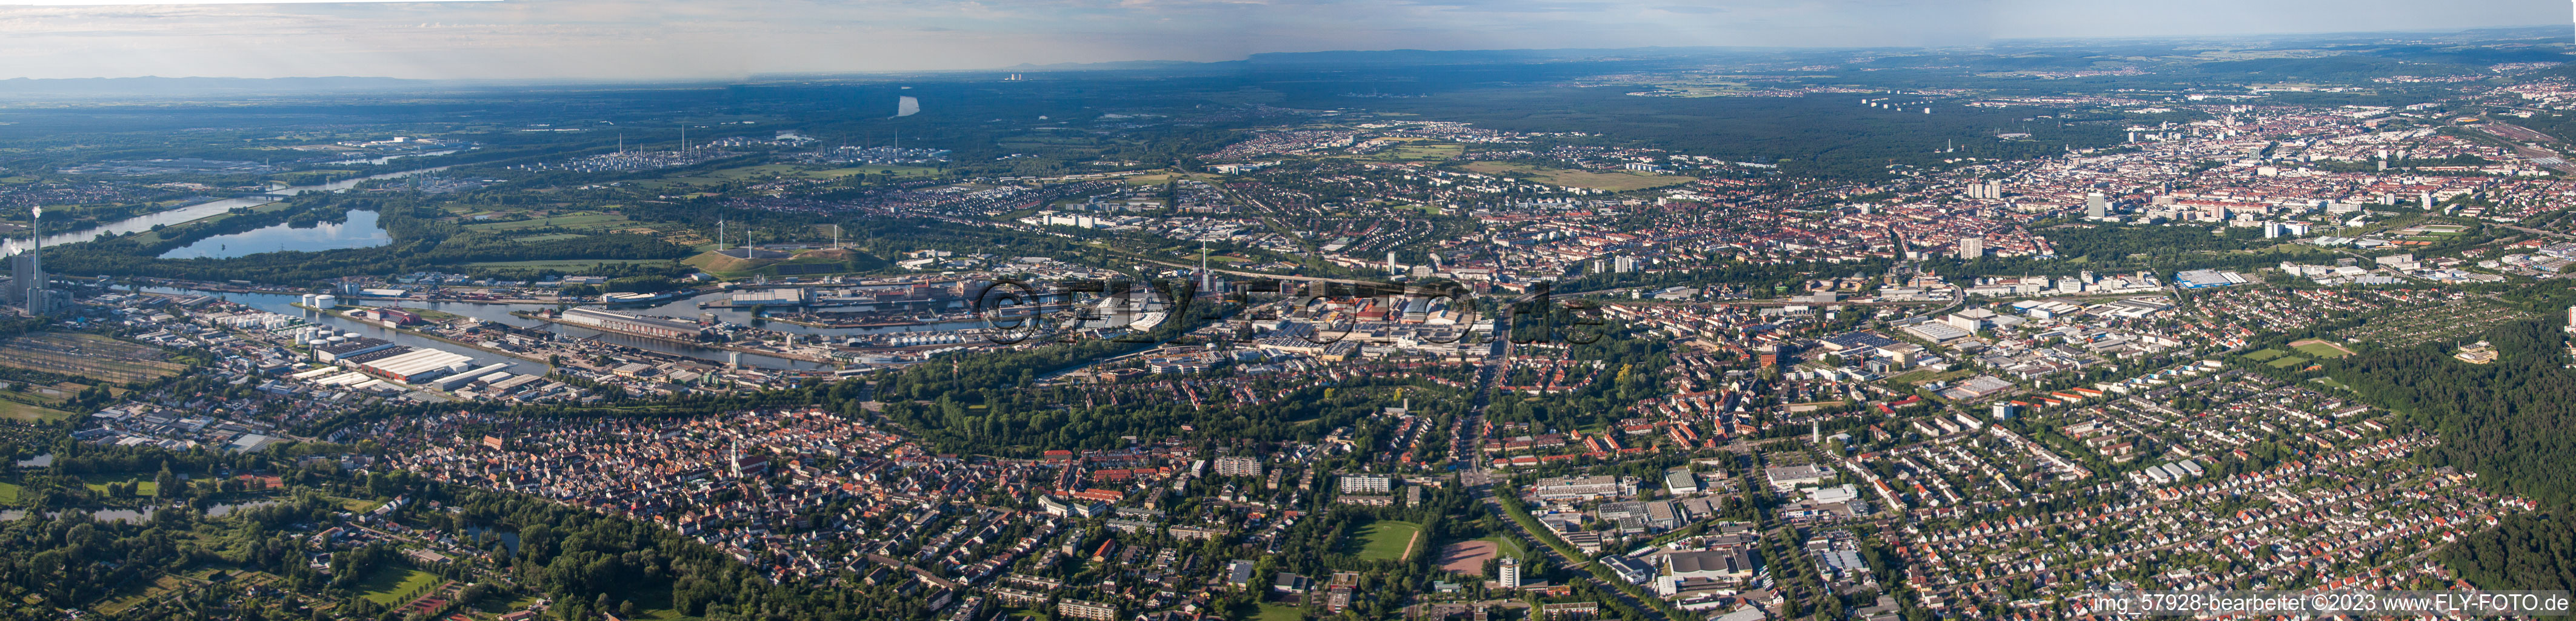 Aerial photograpy of From the southwest in the district Mühlburg in Karlsruhe in the state Baden-Wuerttemberg, Germany